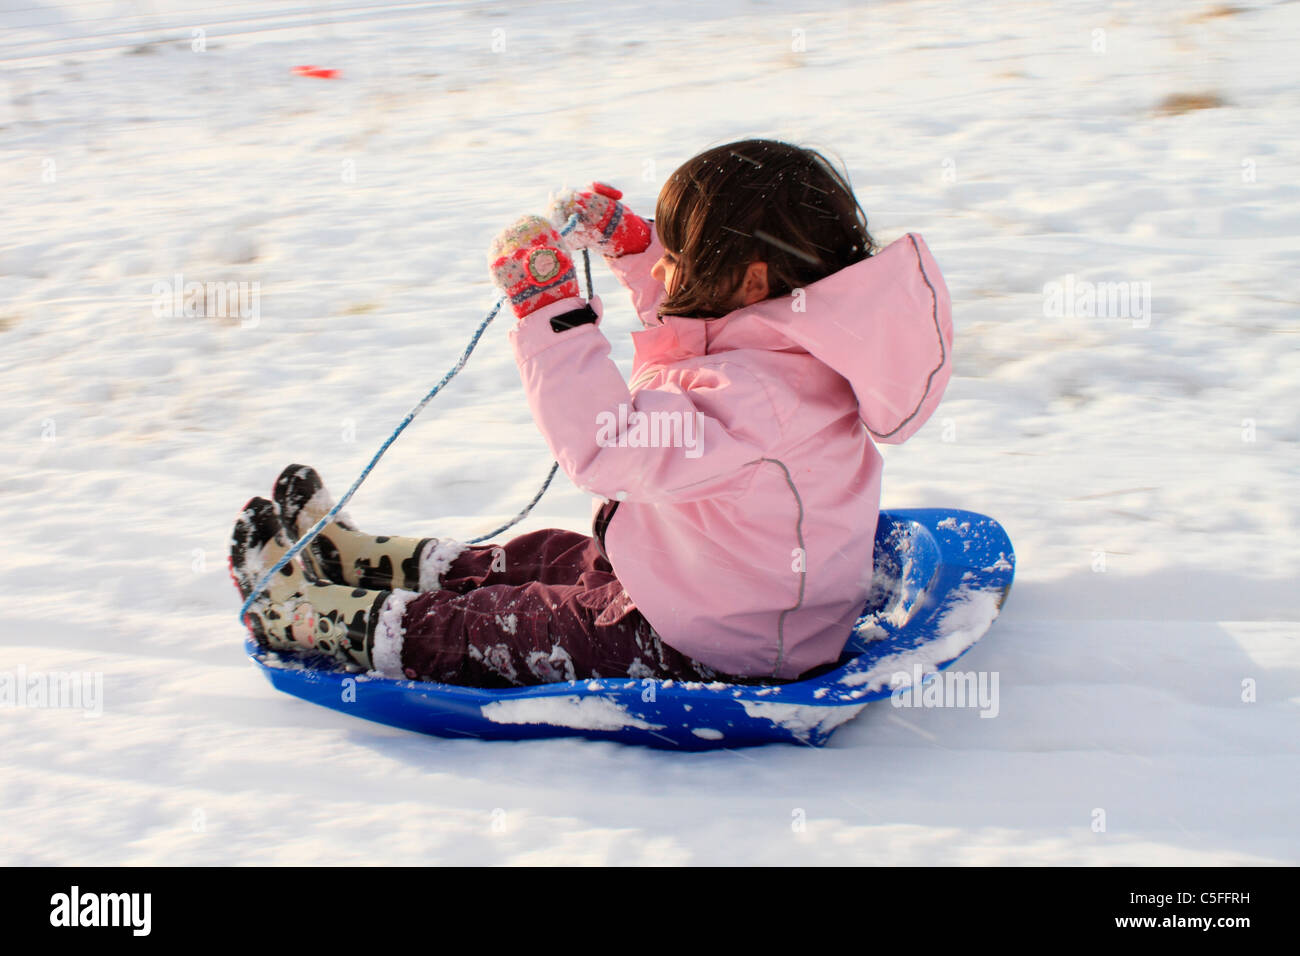 Young girl sledging Stock Photo